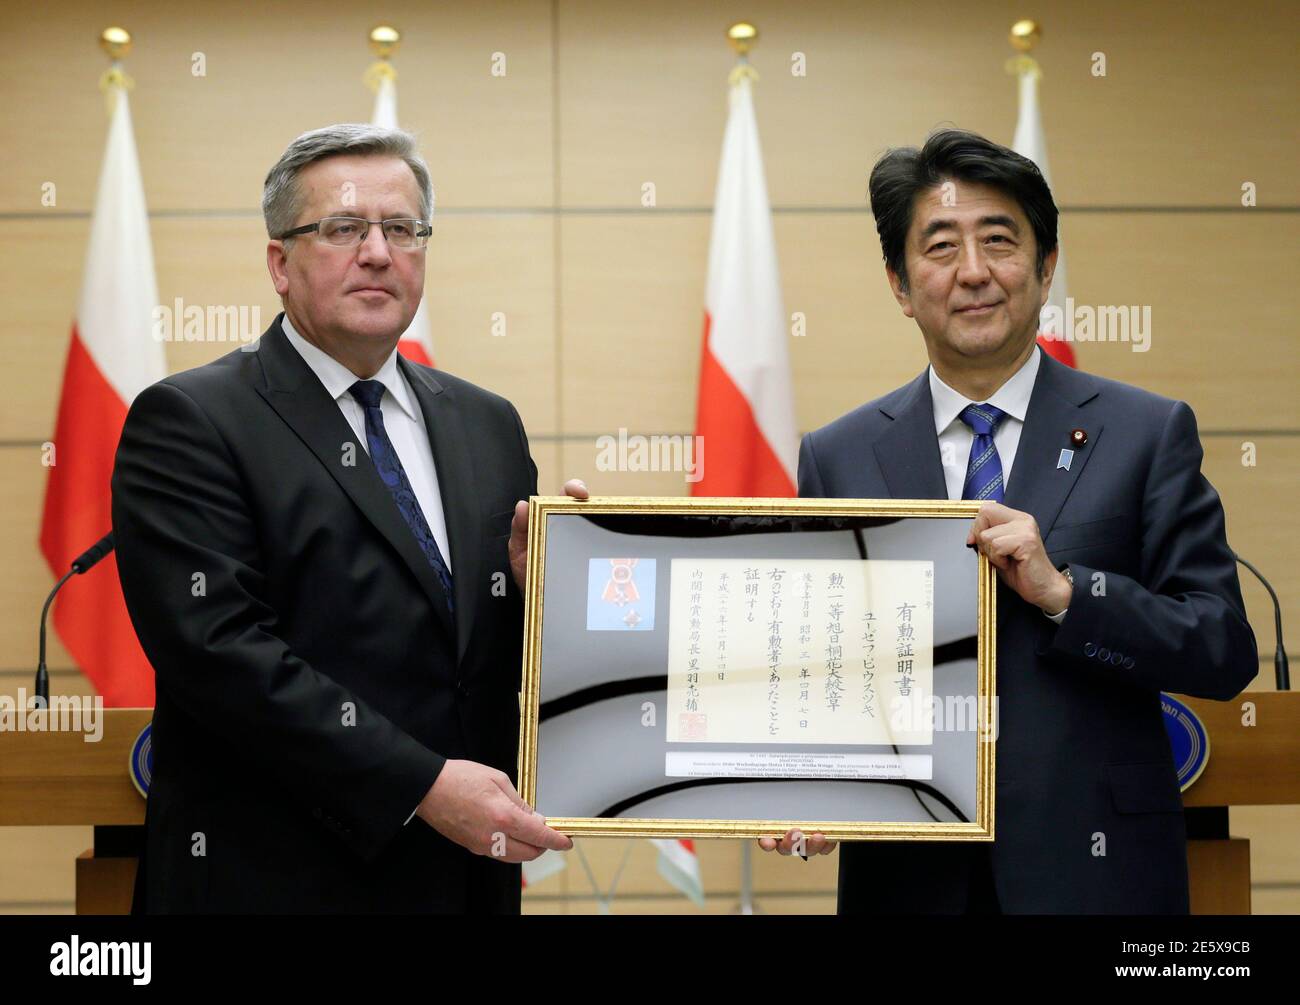 Poland's President Bronislaw Komorowski (L) receives the certification for Jozef Pilsudski, who was Chief of State of the Second Polish Republic, from Japan's Prime Minister Shinzo Abe after their joint news conference after their talks at Abe's official residence in Tokyo  February 27, 2015. Pilsudski was decorated the Grand Cordon of the Order of the Rising Sun, Paulownia Flowers, one of highest ranked Japanese decoration by Japan, in 1928. Komorowski is in Japan for a two-day visit. REUTERS/Kimimasa Mayama/Pool (JAPAN - Tags: POLITICS) Stock Photo